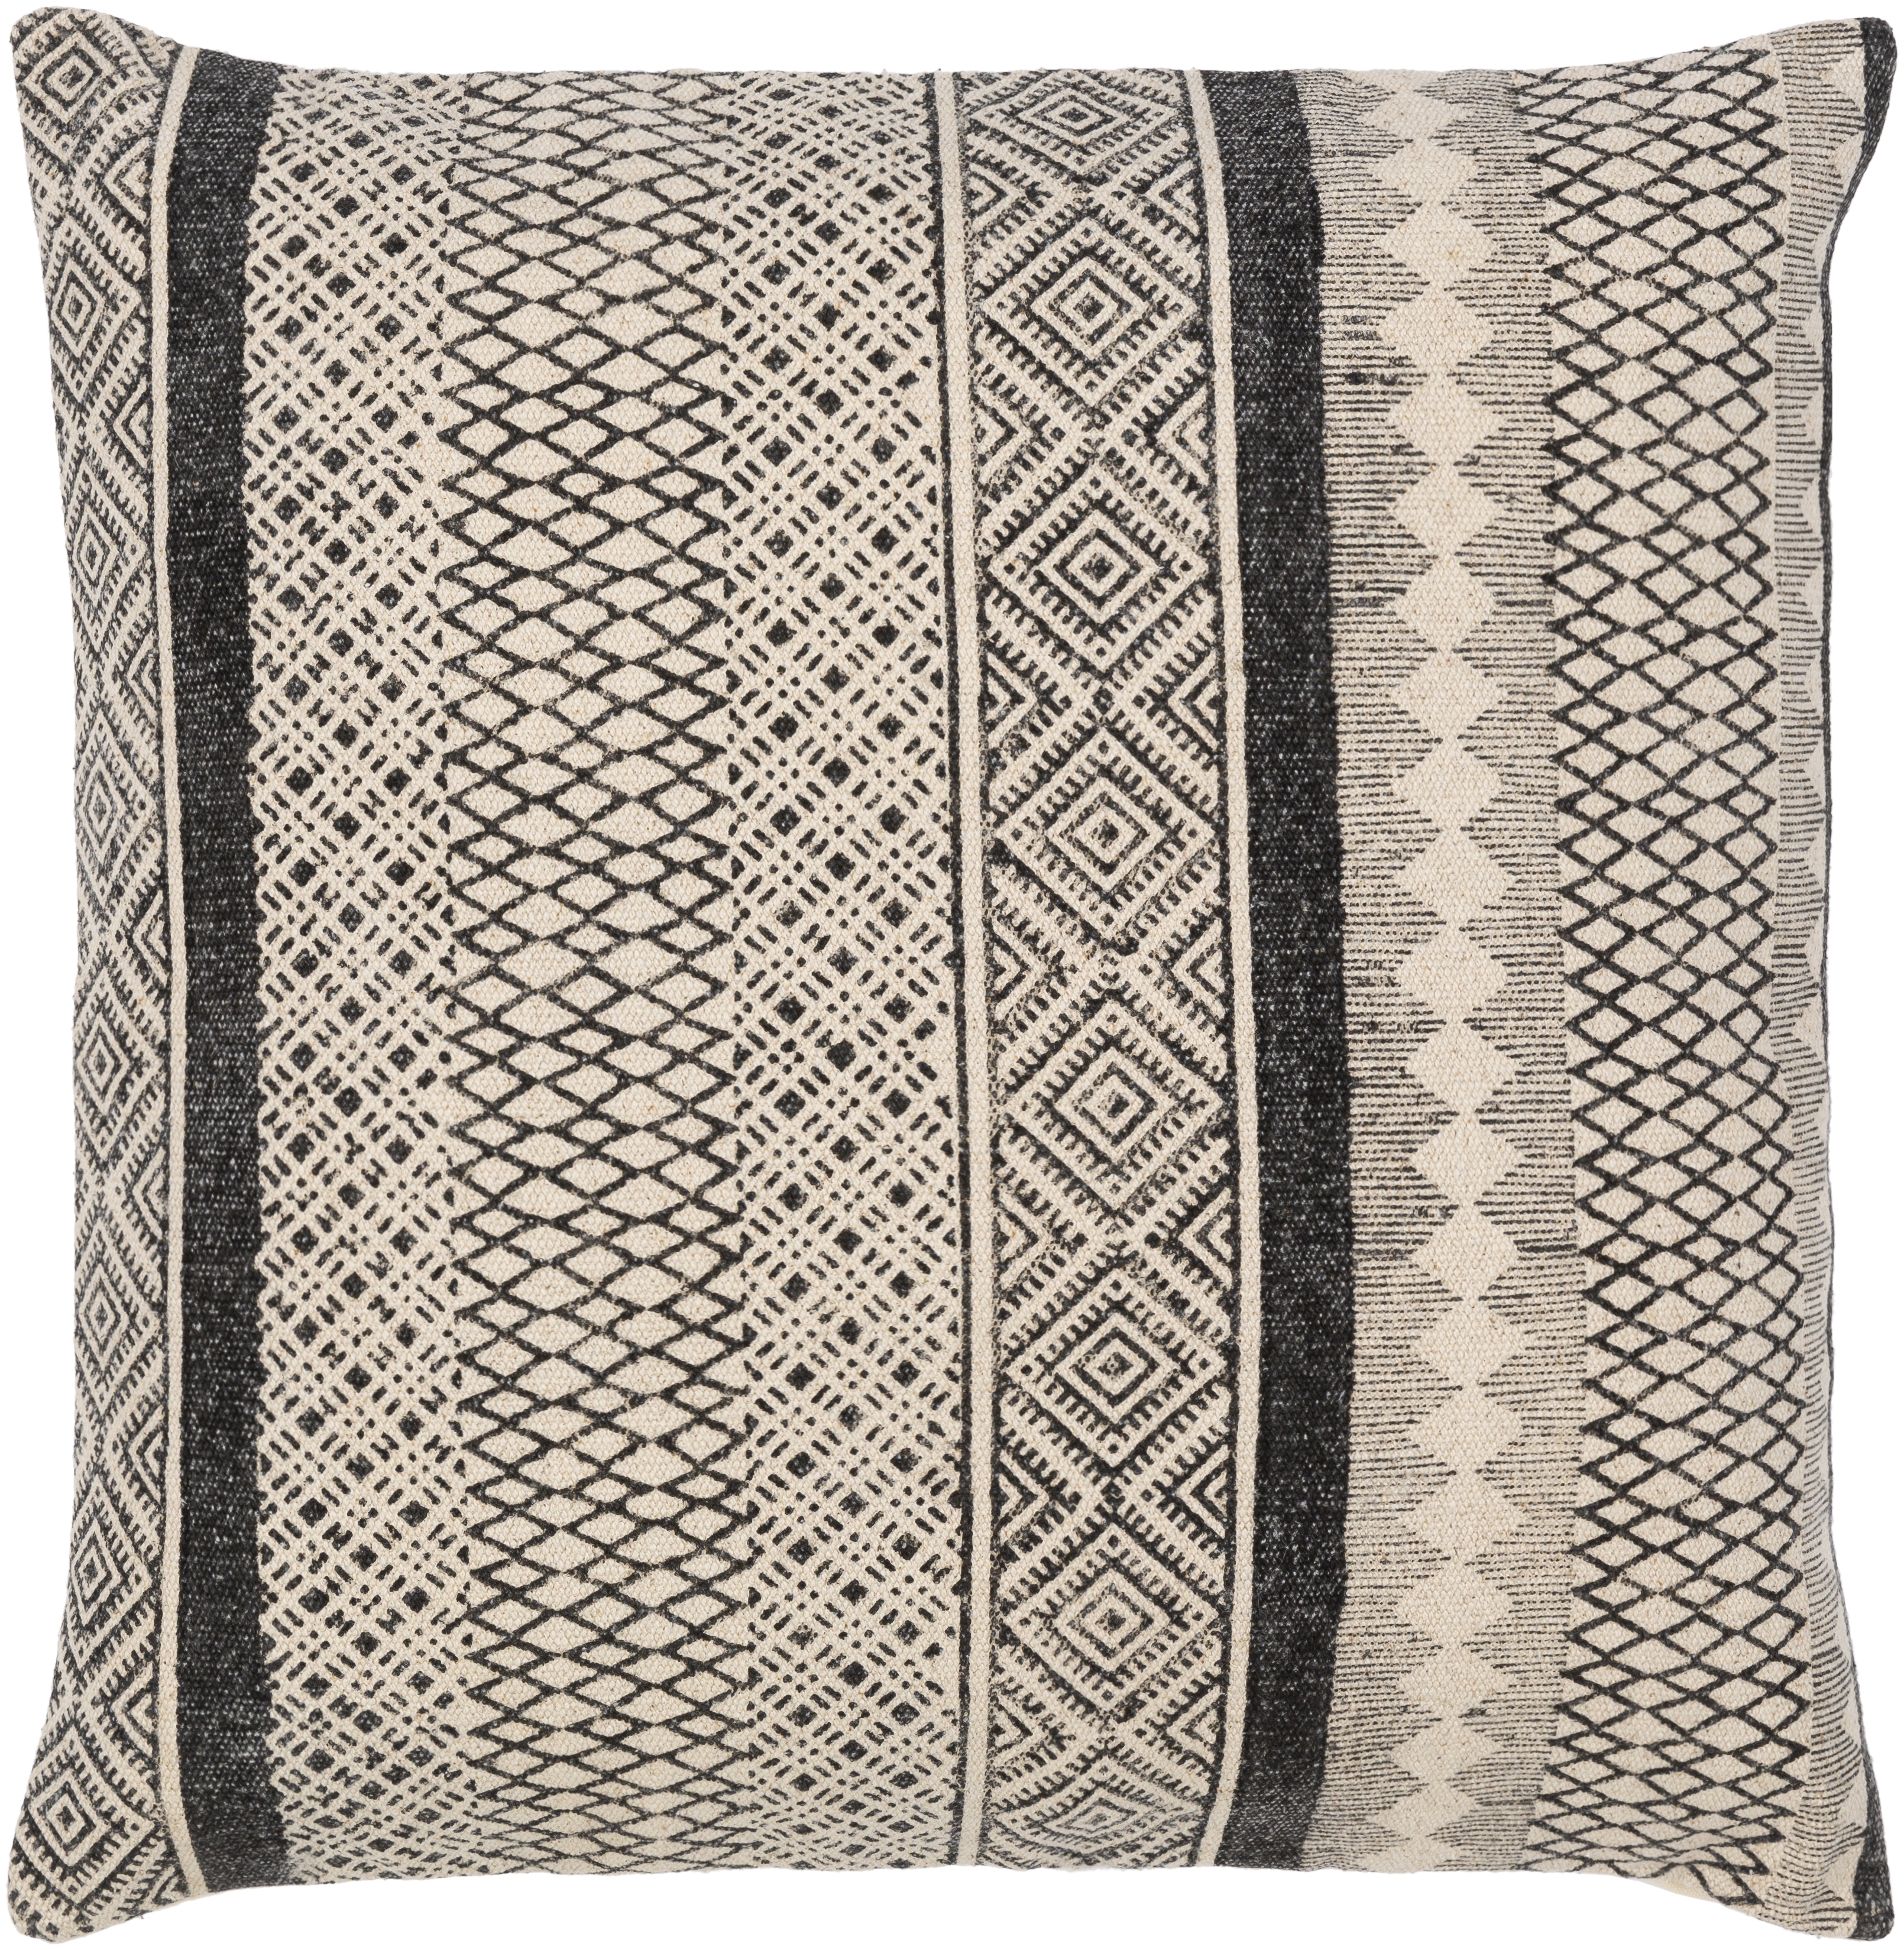 Janya Throw Pillow, 20" x 20", with down insert - Image 0